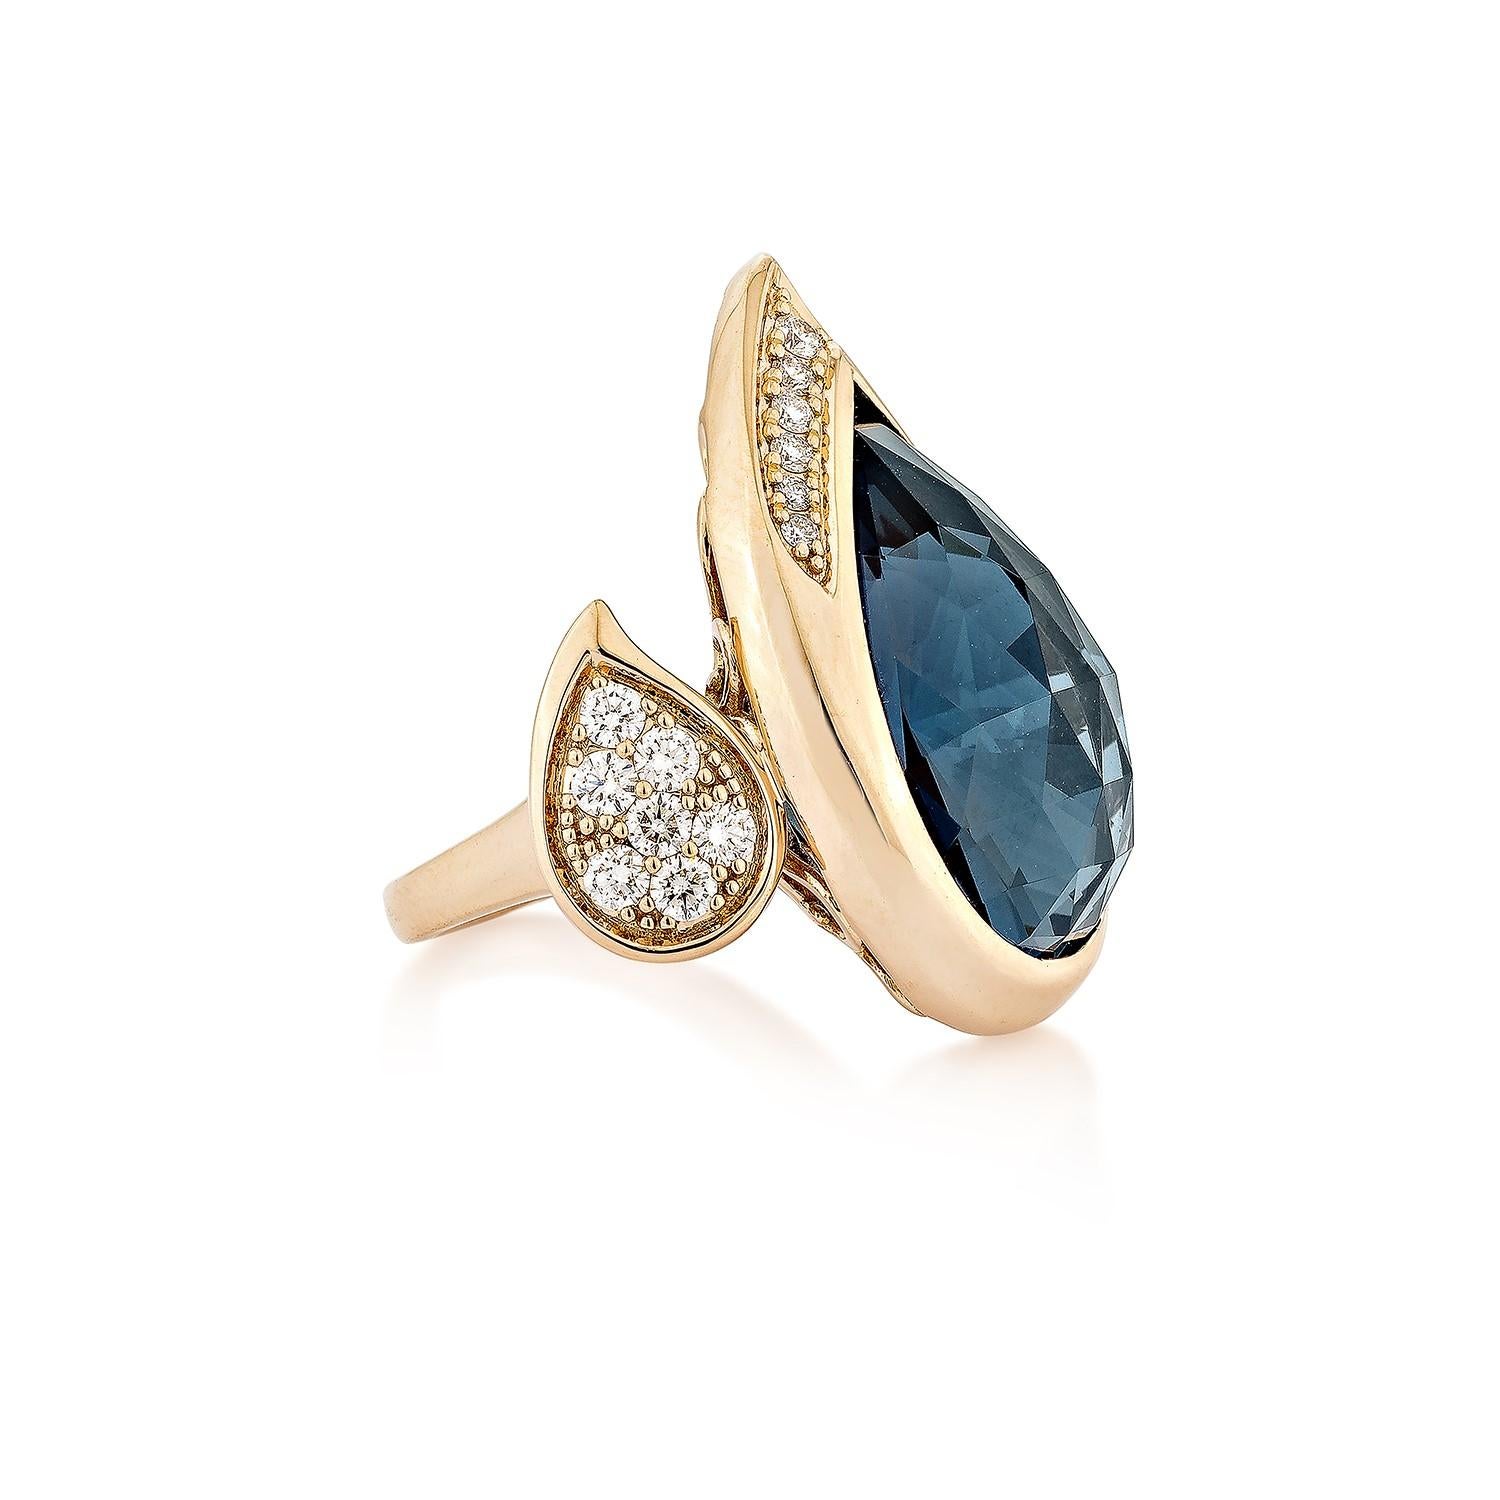 Bold blue topaz! Light and easy to wear, this fancy ring showcases deep blue topaz accented with diamonds. This exquisite 18-karat rose gold pendant is ideal for any special occasion because it combines traditional elegance with modern